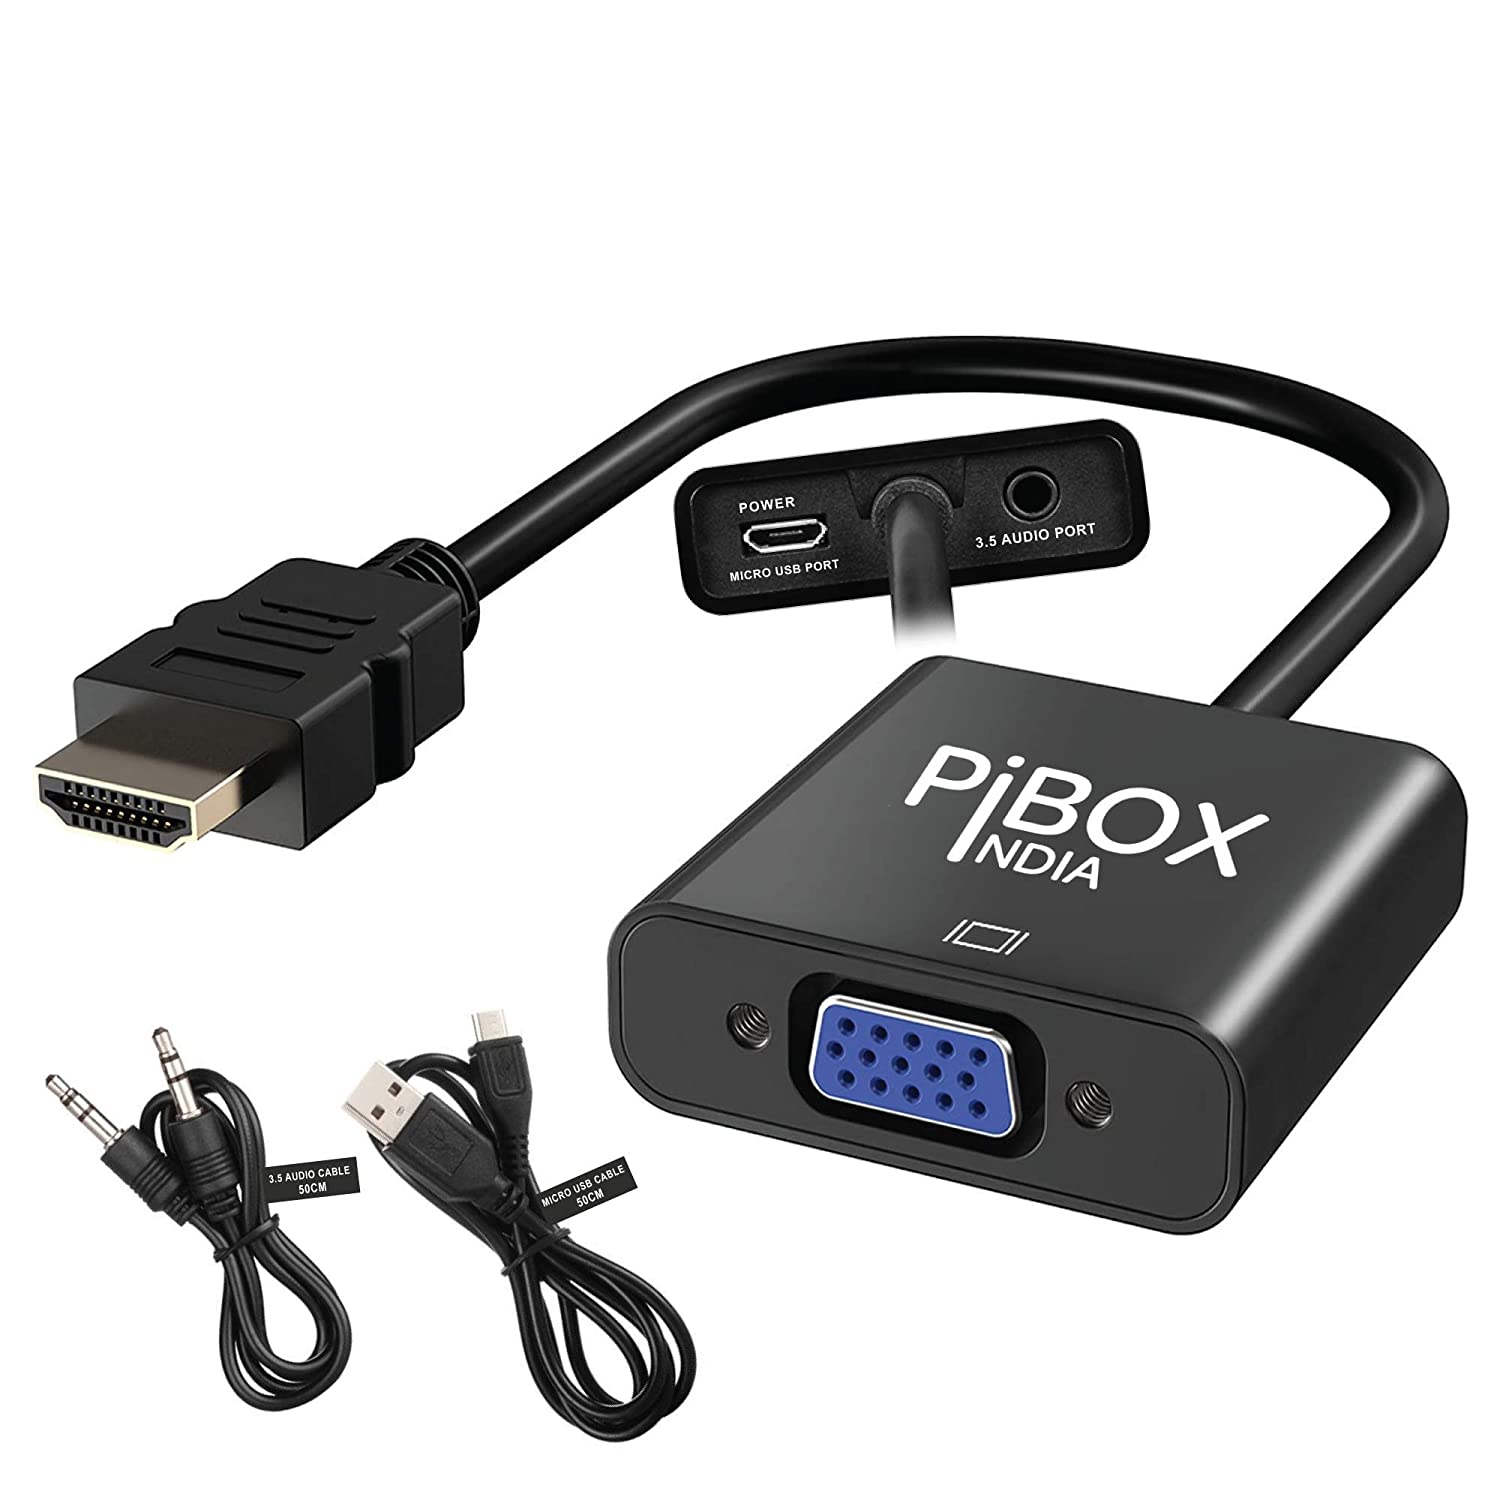 PiBOX India, HDMI to VGA with Audio and power, Gold-Plated Male to Female VGA for Computer, Desktop, Laptop, PC, Monitor, Projector, HDTV, Raspberry Media Players, Xbox Black [NOT for to